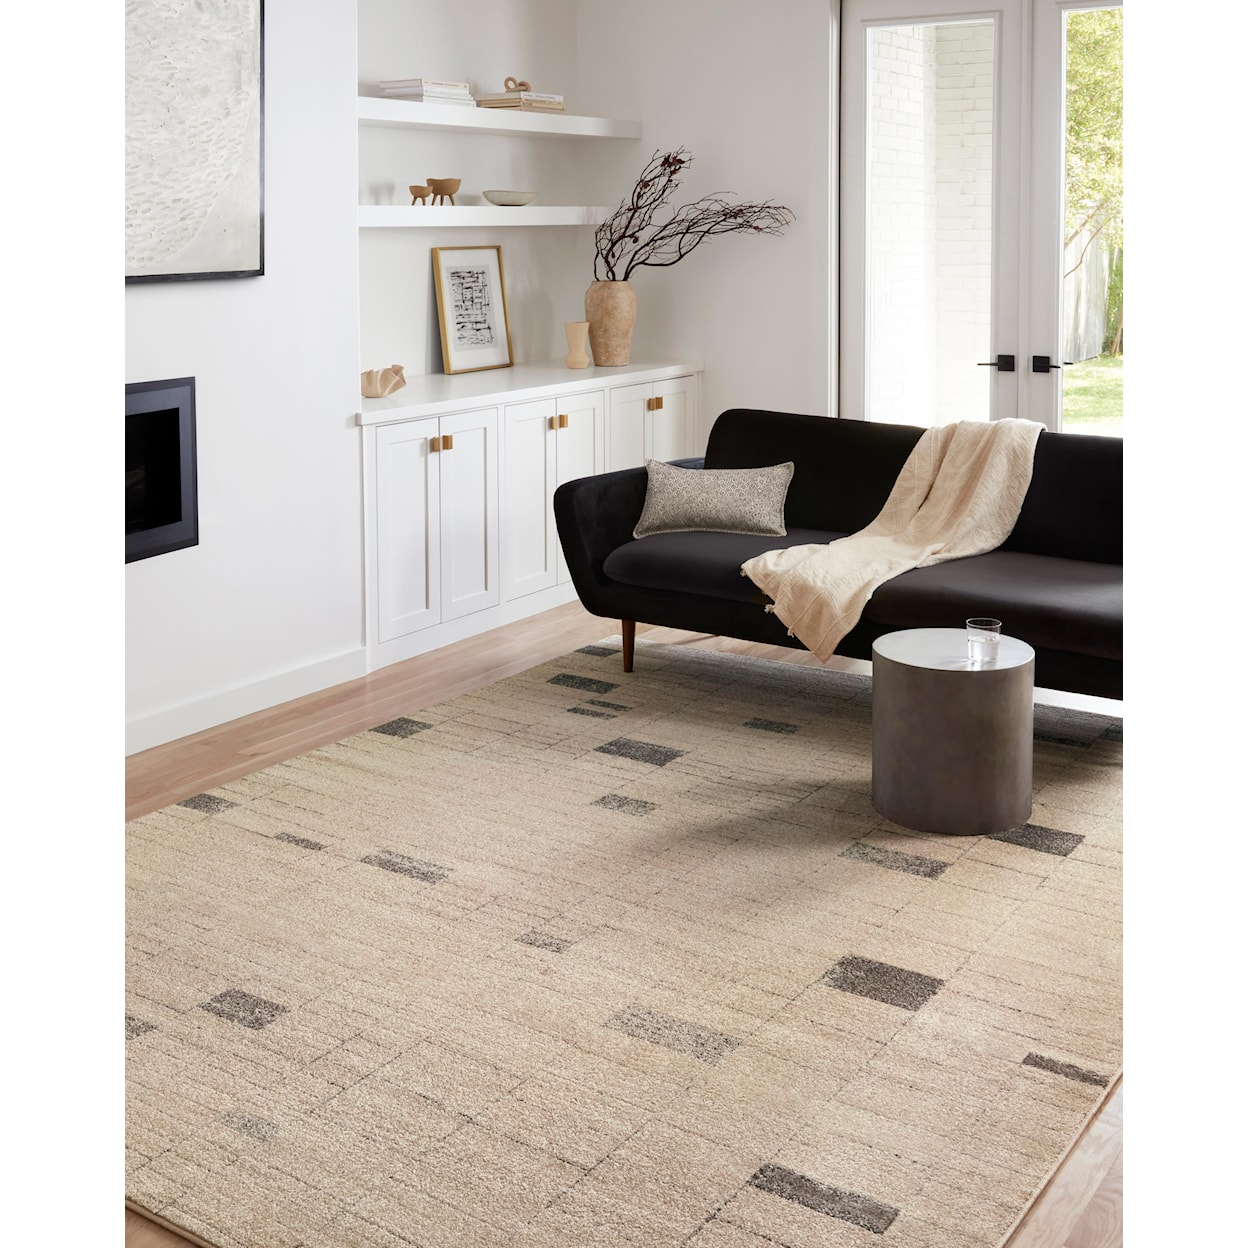 Reeds Rugs Bowery 5'5" x 7'6"  Rug